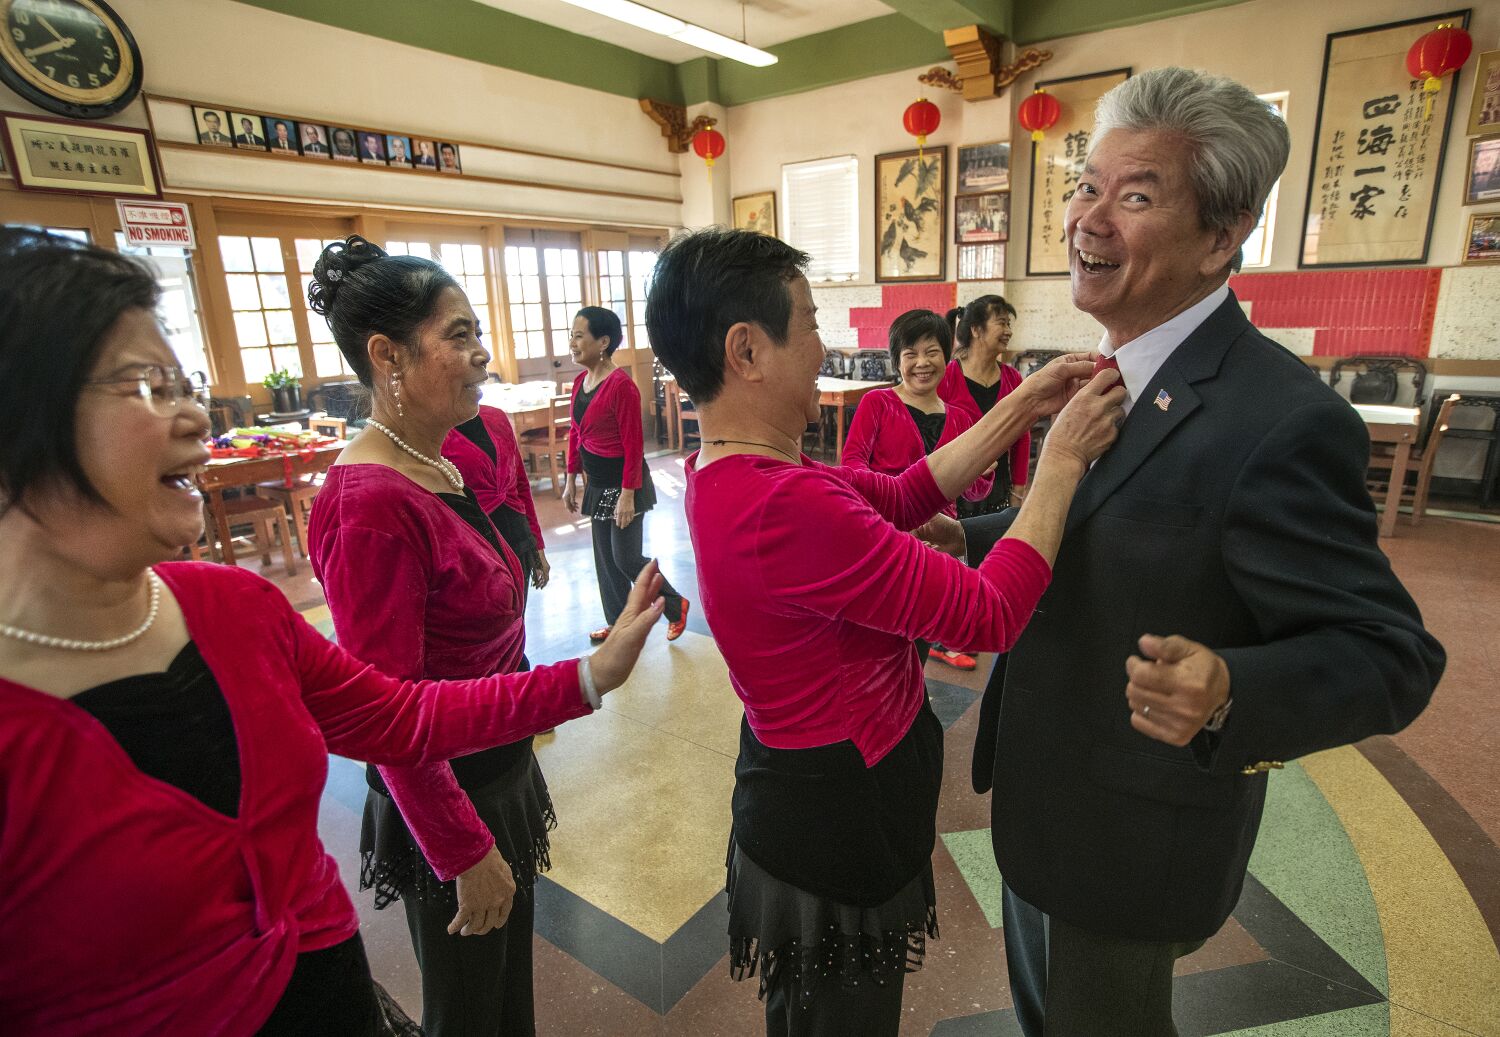 Mutual aid clubs are still going strong in L.A. Chinatown. But their future is uncertain